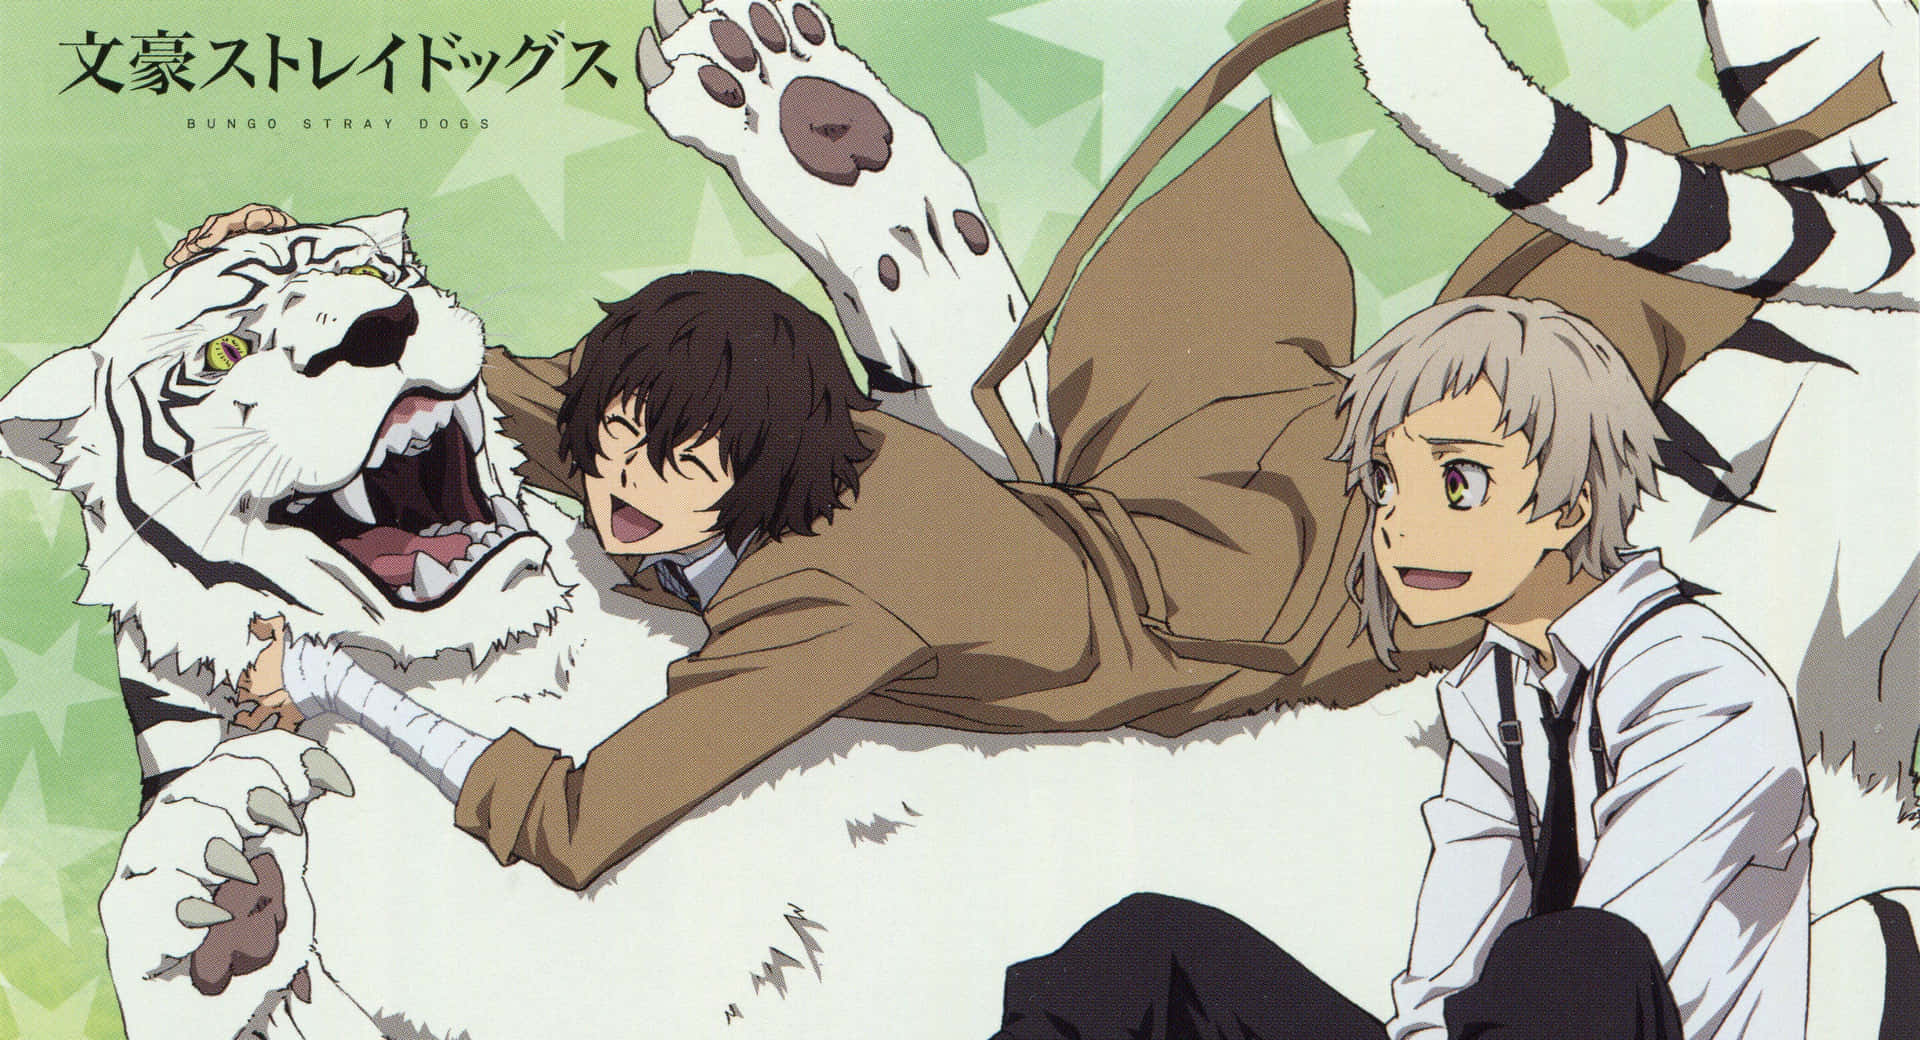 Explore The Fascinating World of Bungo Stray Dogs